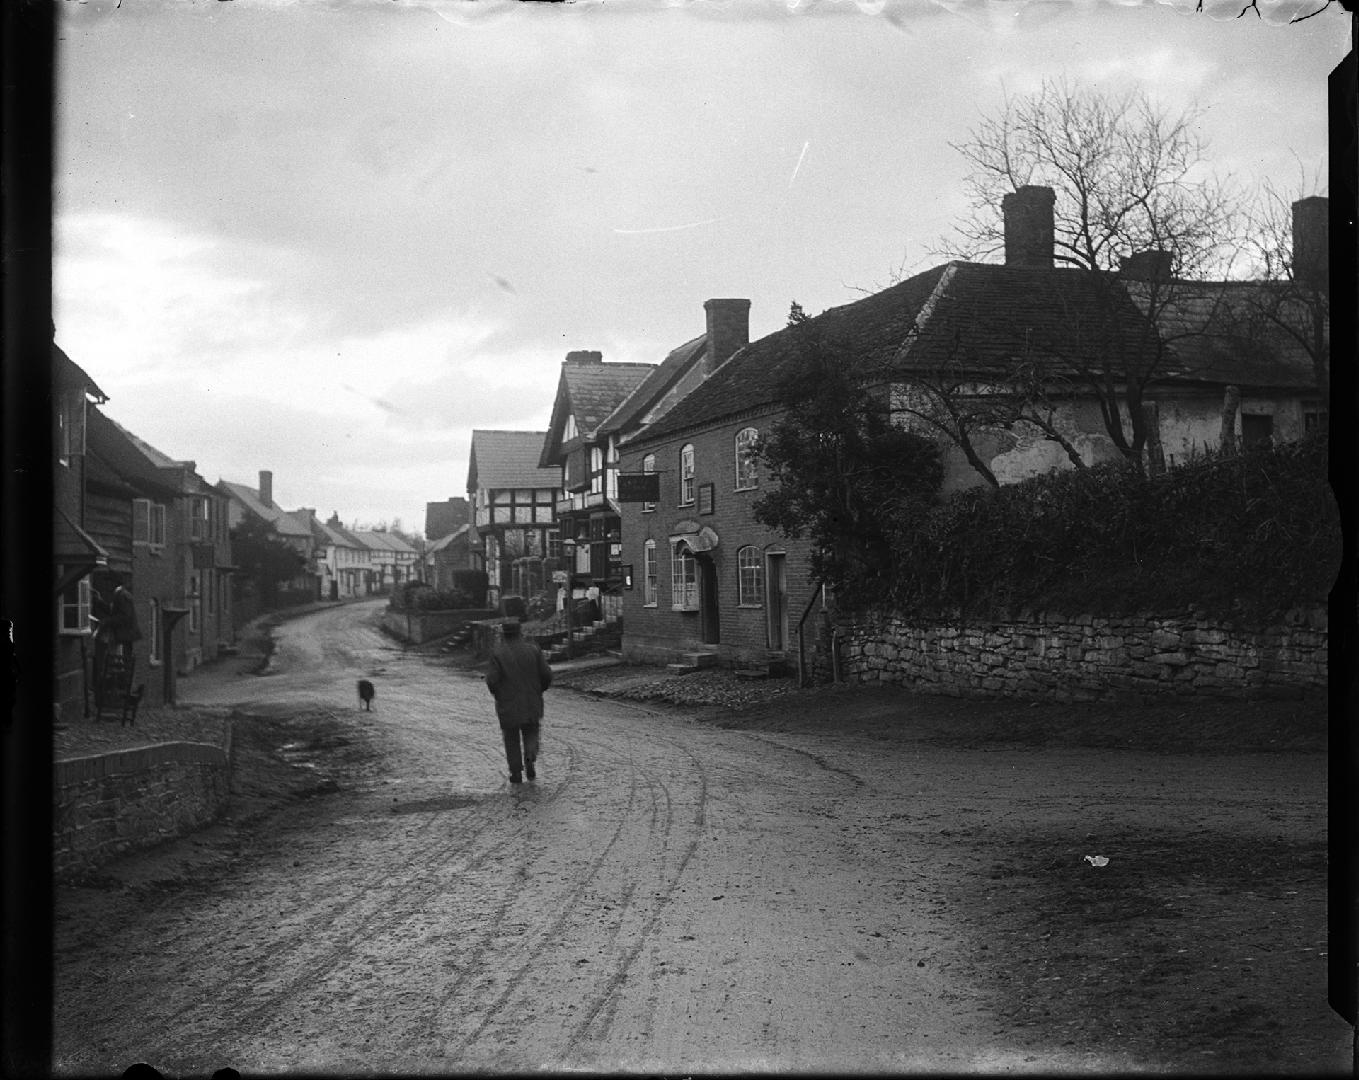 A photograph of a city street, with a muddy dirt road winding through a neighbourhood with two  ...